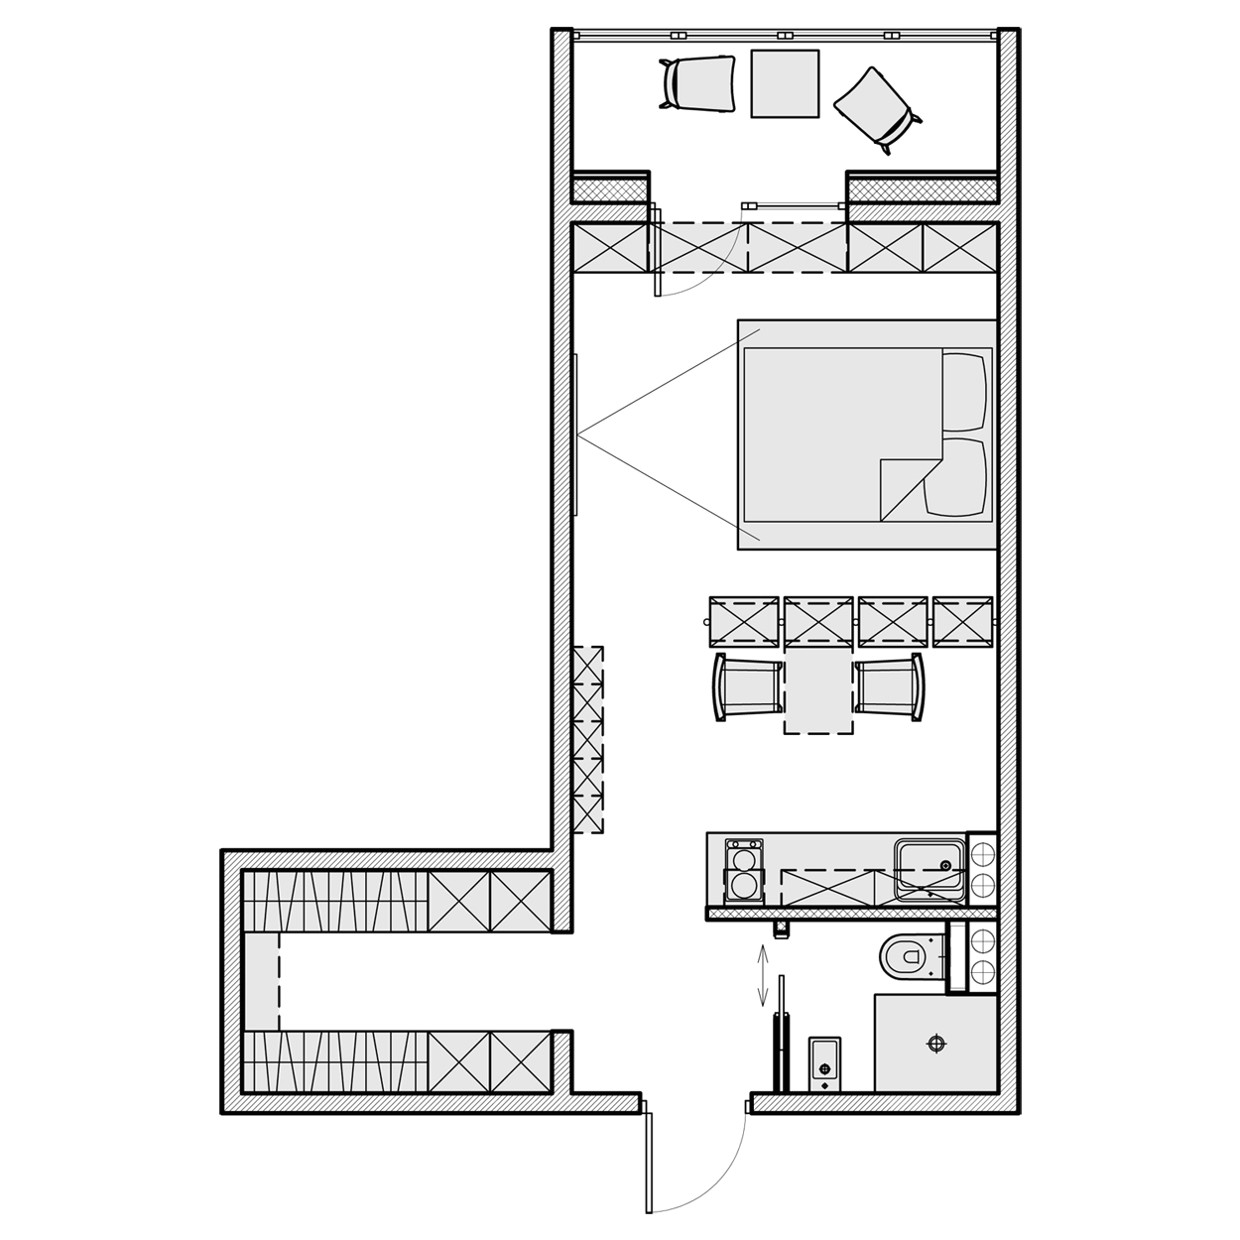 3 beautiful homes under 500 square feet floor plans included